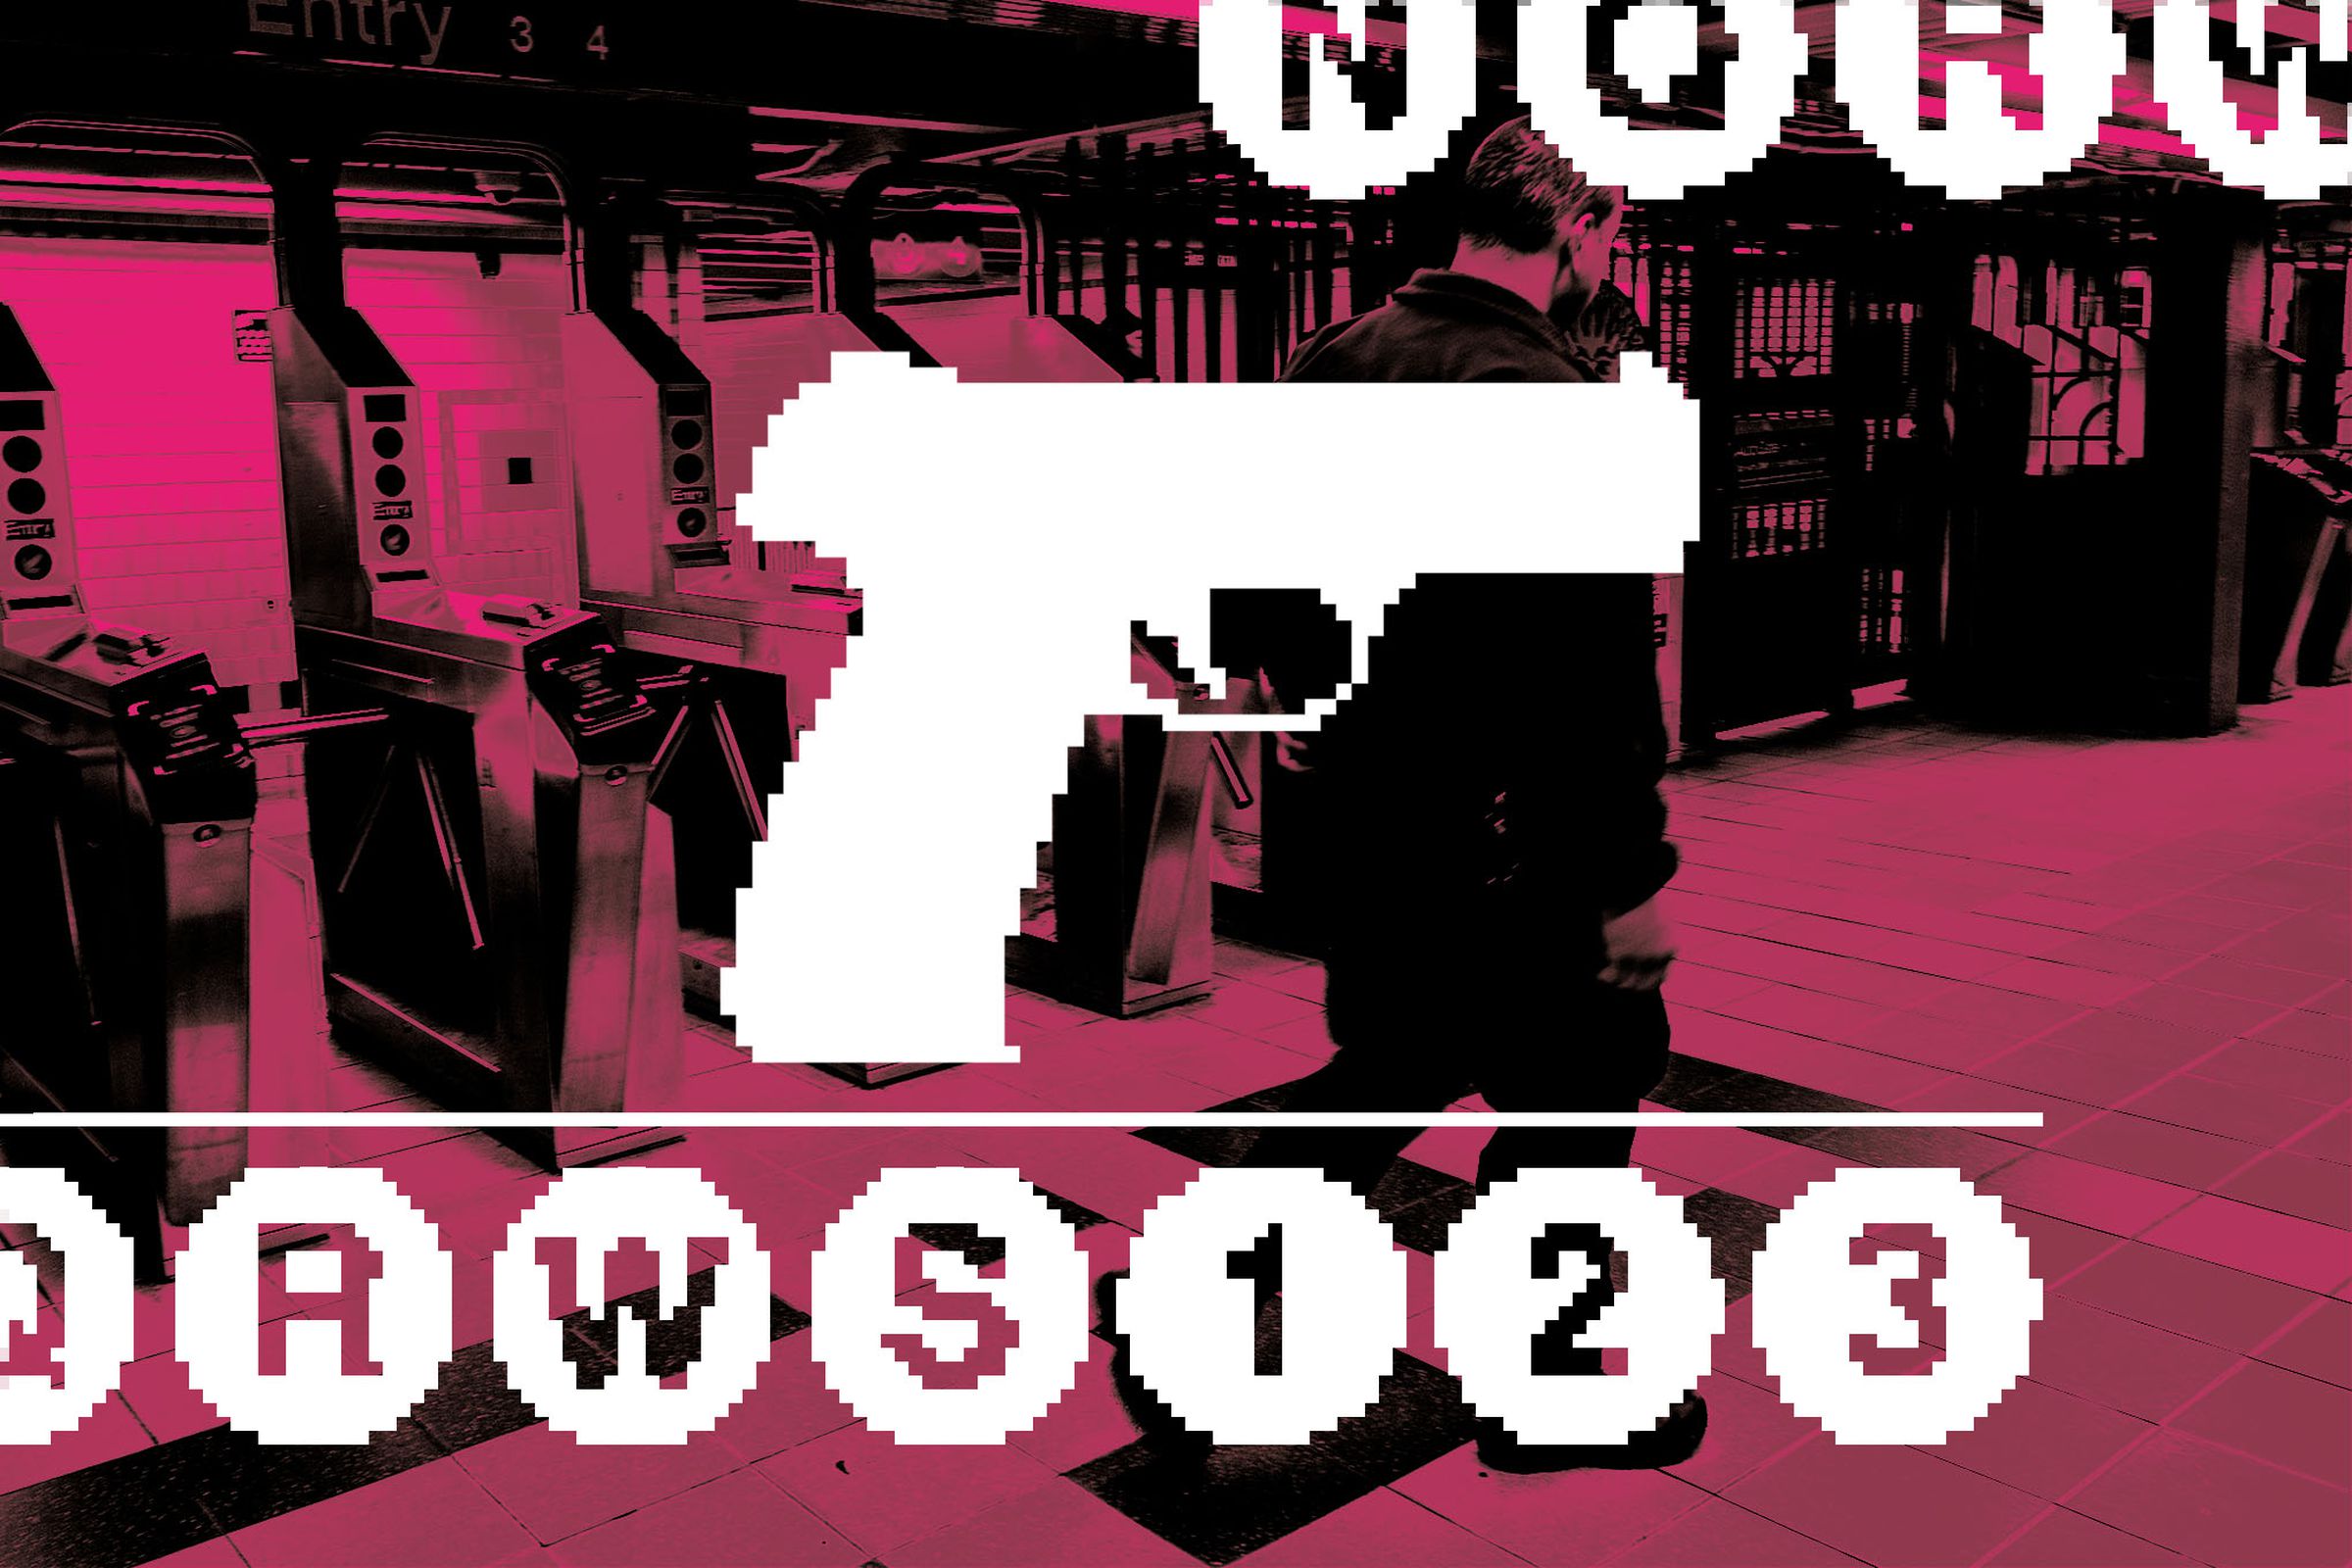 Photo illustration of an NYPD officer in a subway station behind a pixelated gun.